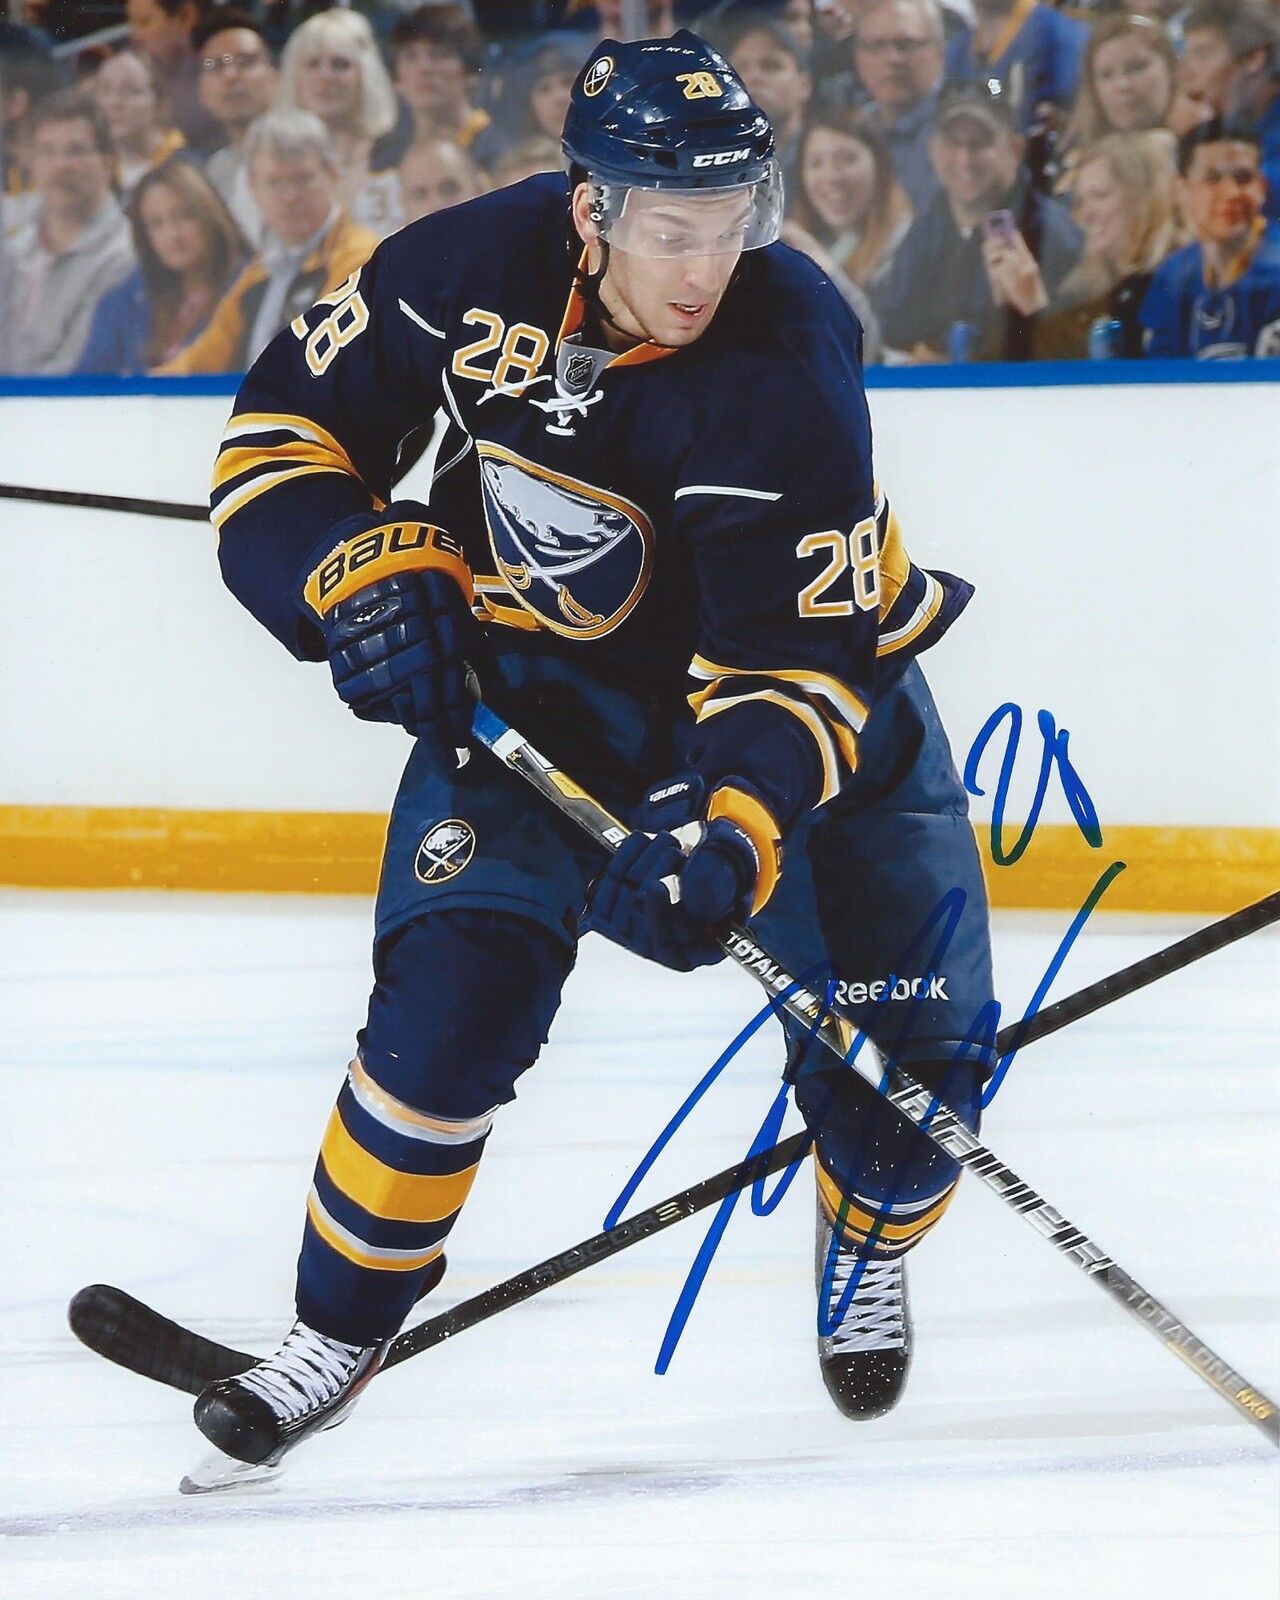 Zemgus Girgensons Signed 8x10 Photo Poster painting Buffalo Sabres Autographed COA B